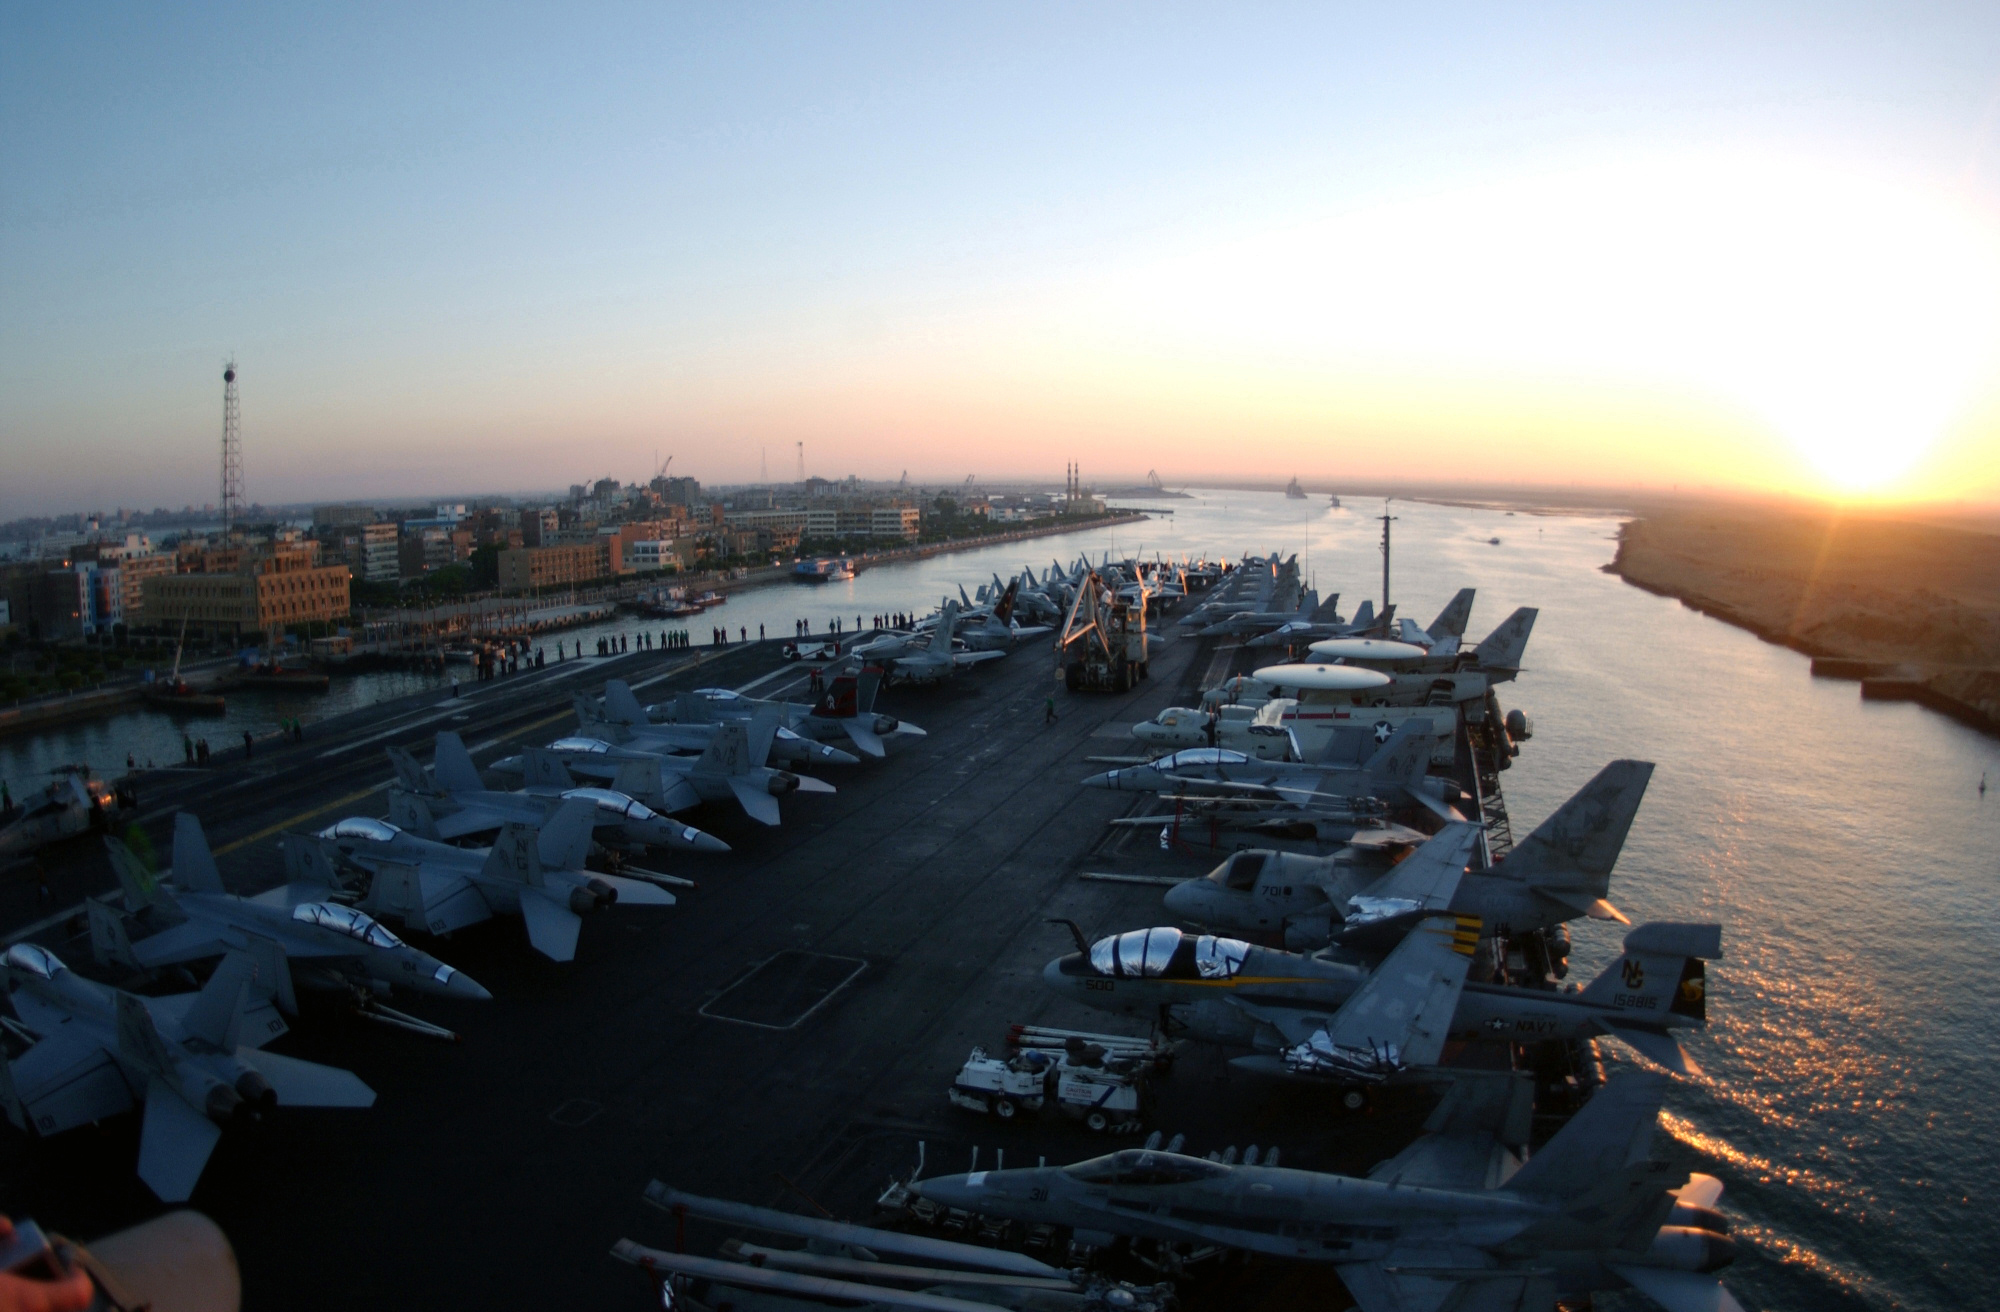 US_Navy_050708-N-0380T-039_During_the_early_morning_hours_the_Nimitz-class_aircraft_carrier_enters_the_Suez_Canal_to_begin_its_transit_to_the_Mediterranean_Sea.jpg